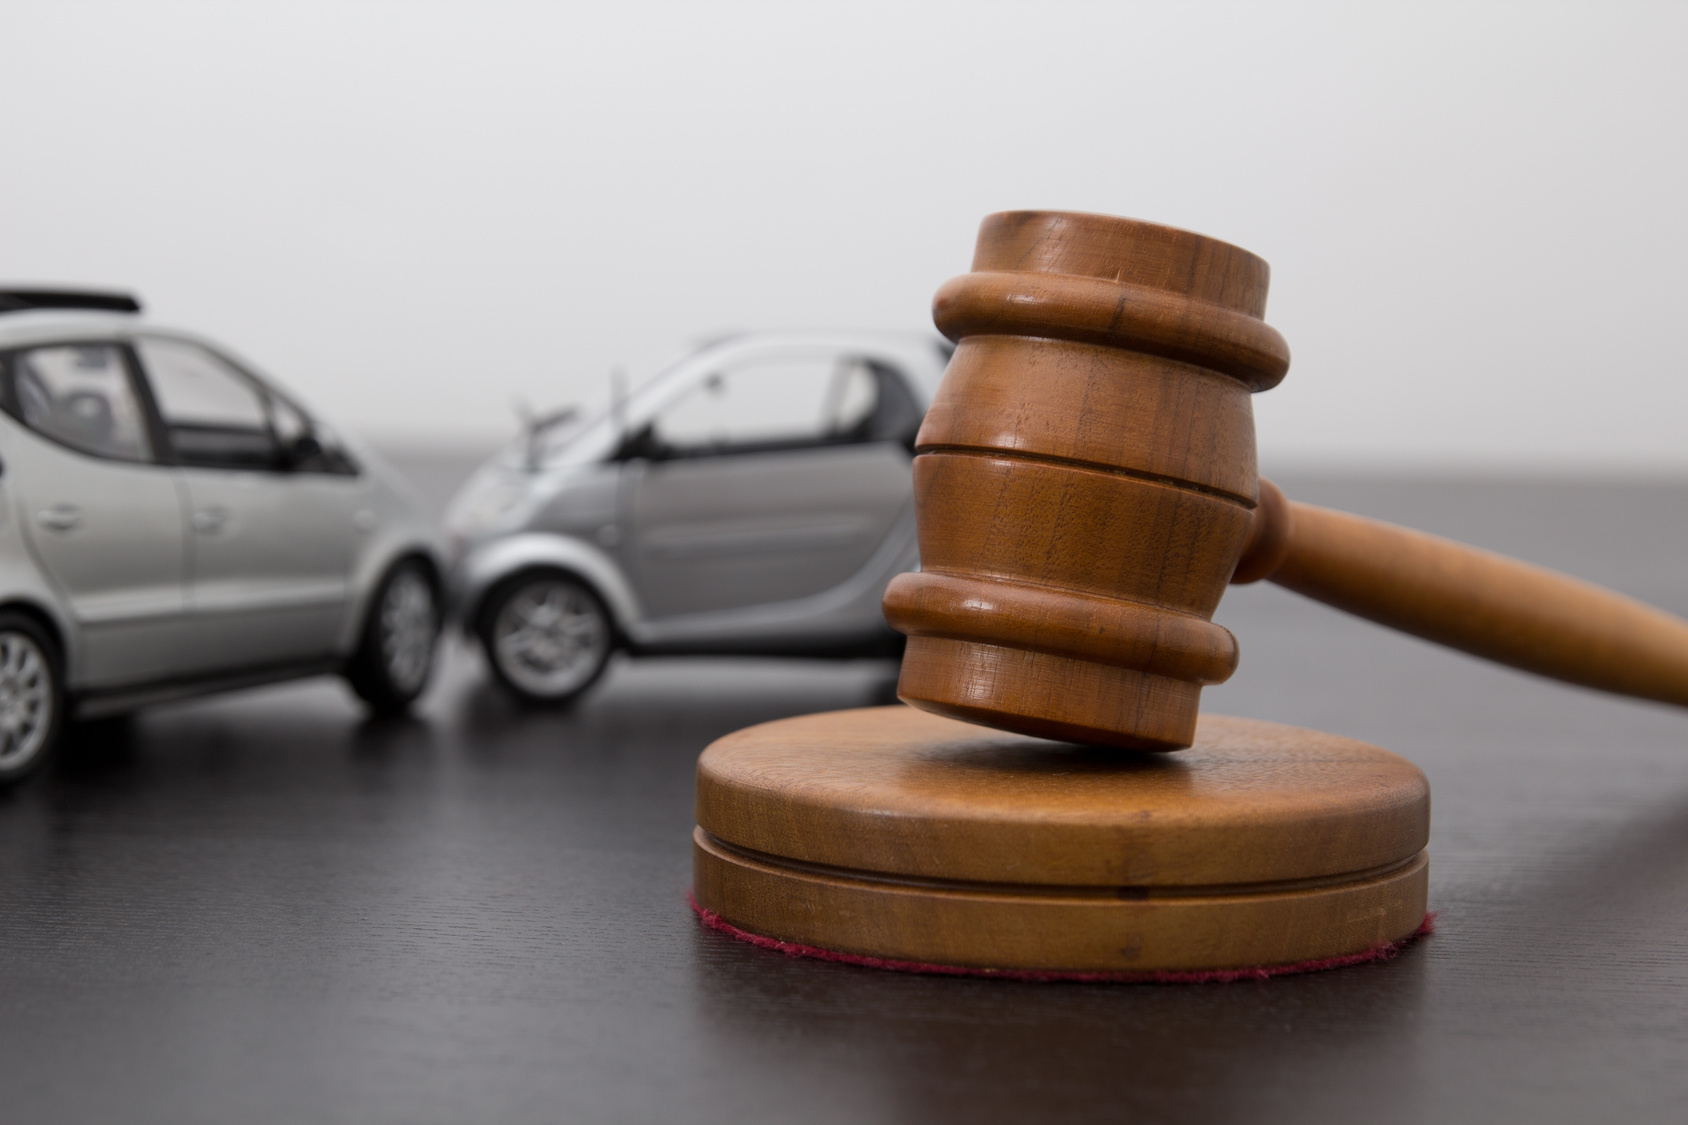  motor vehicle accident law firm         